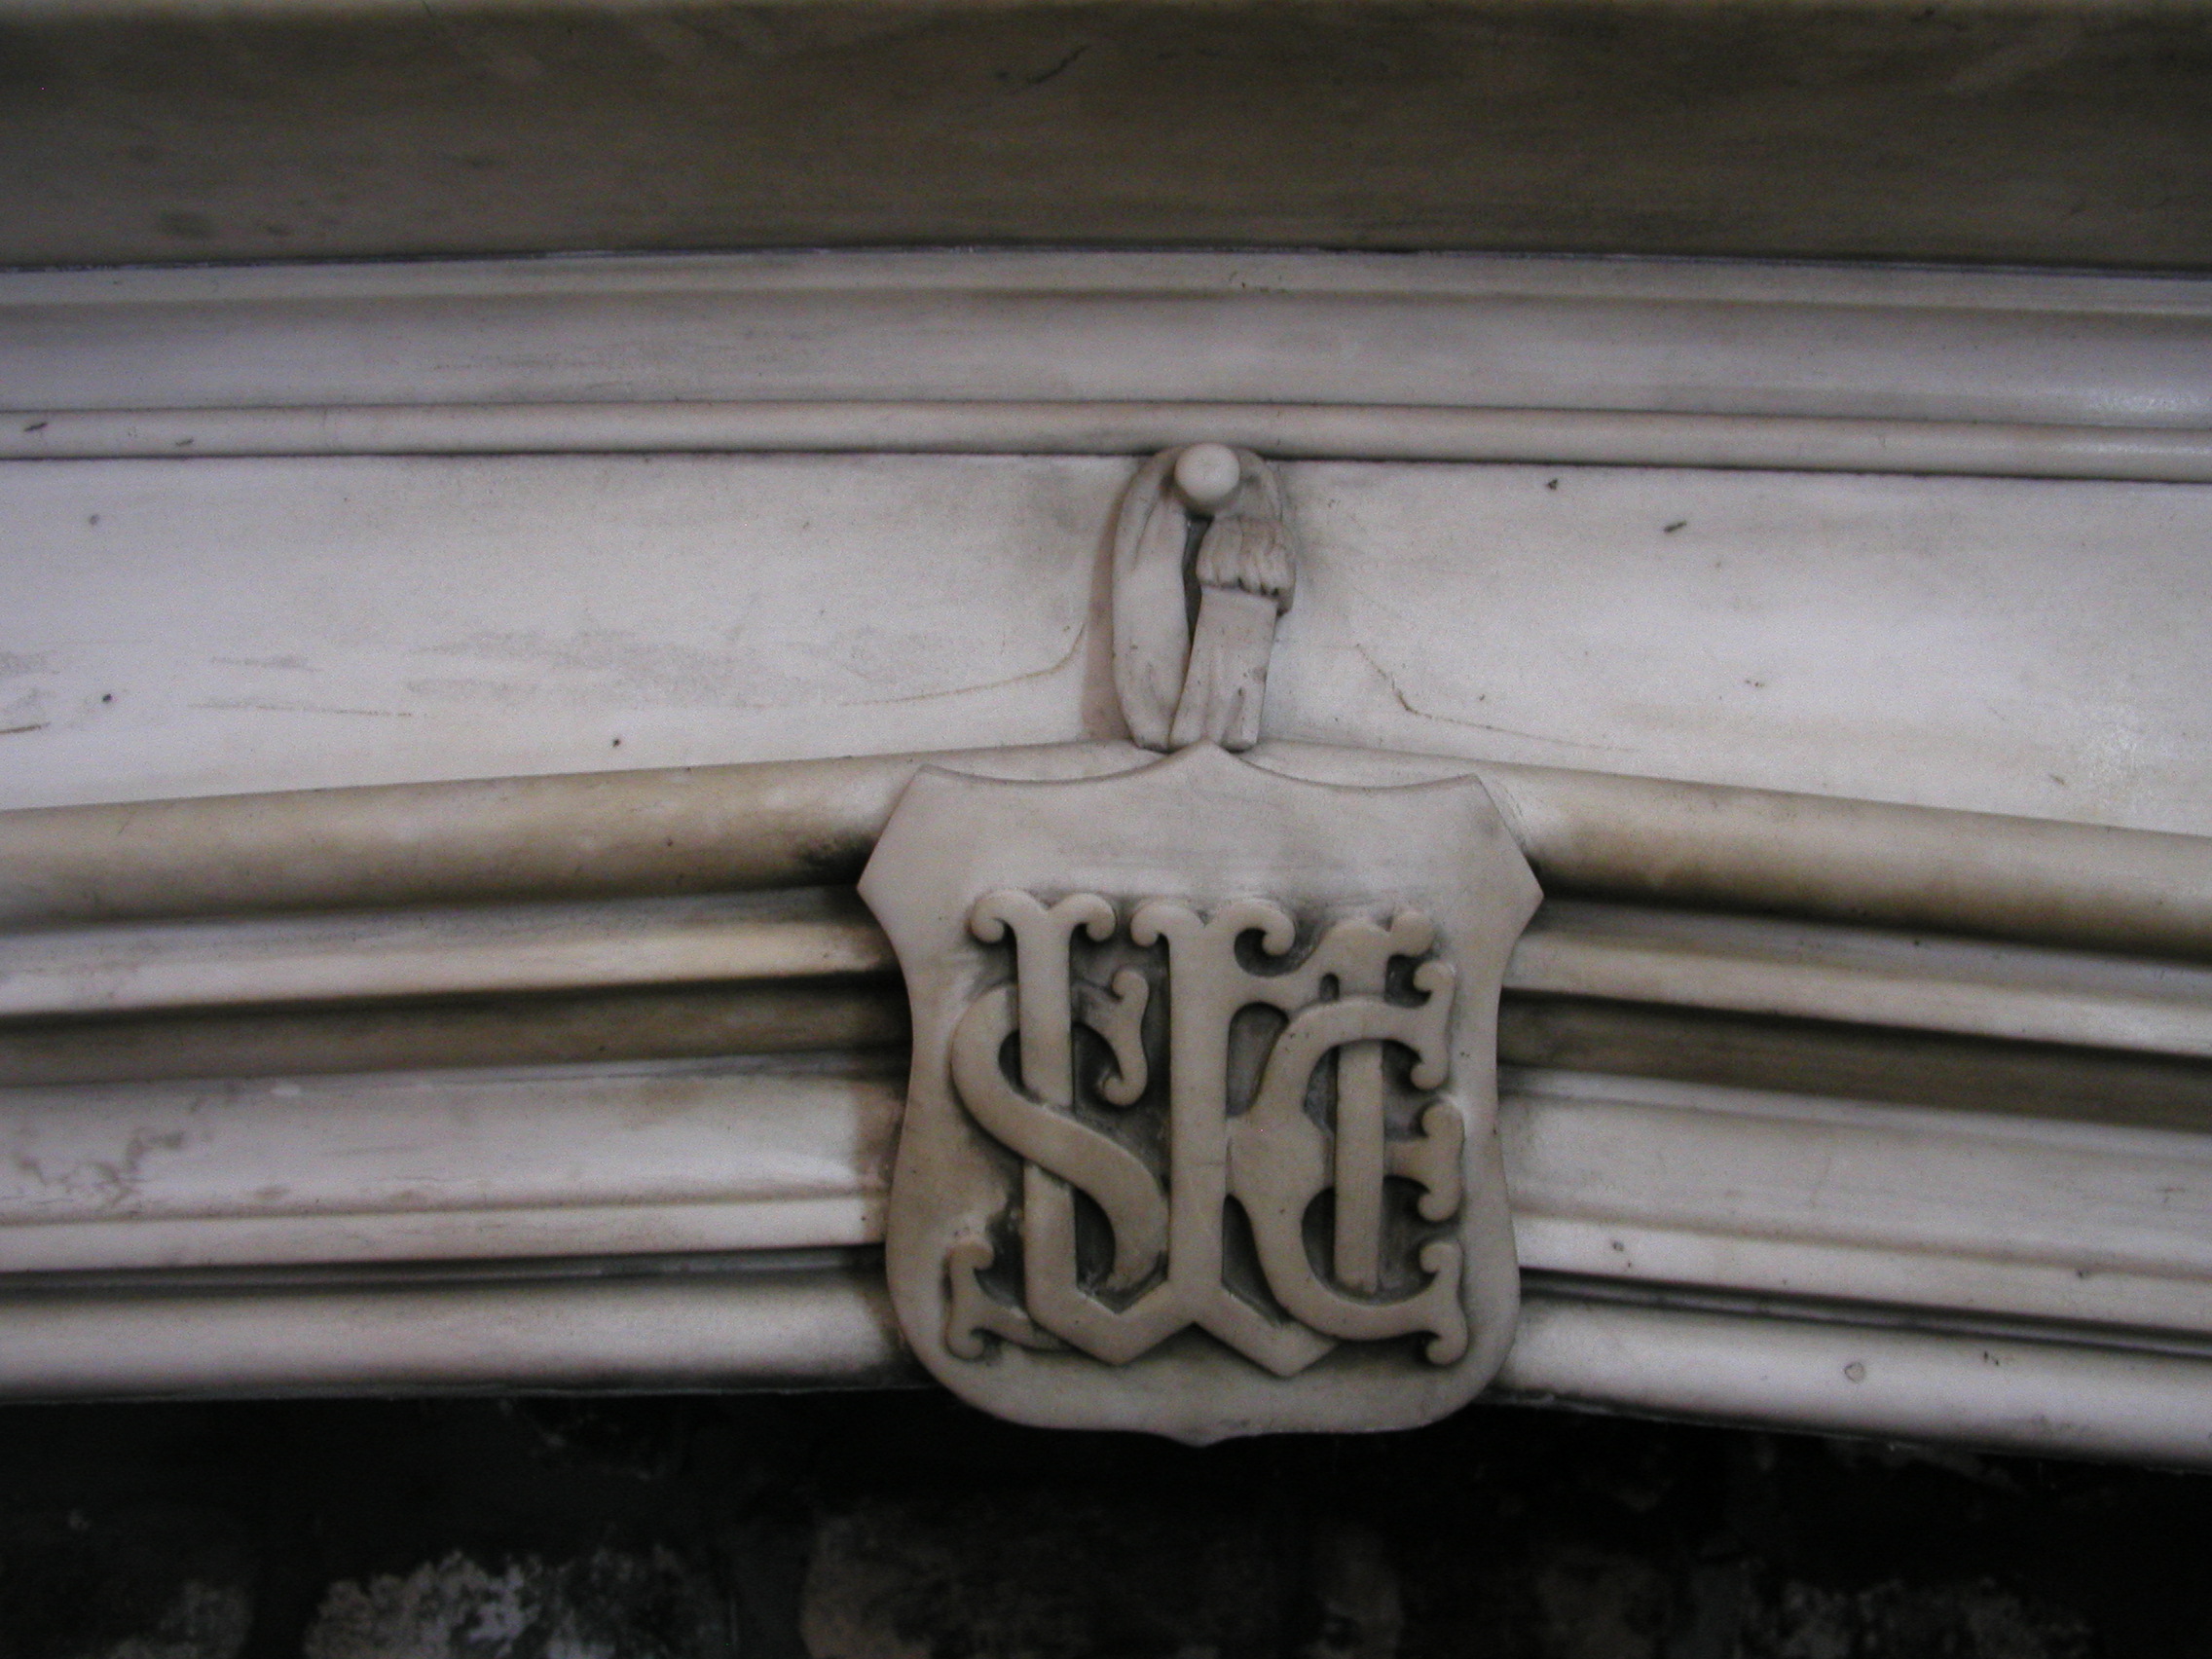 JPEG image - Lounge: both fireplaces have Samuel Woodhouse's initials carved over openings